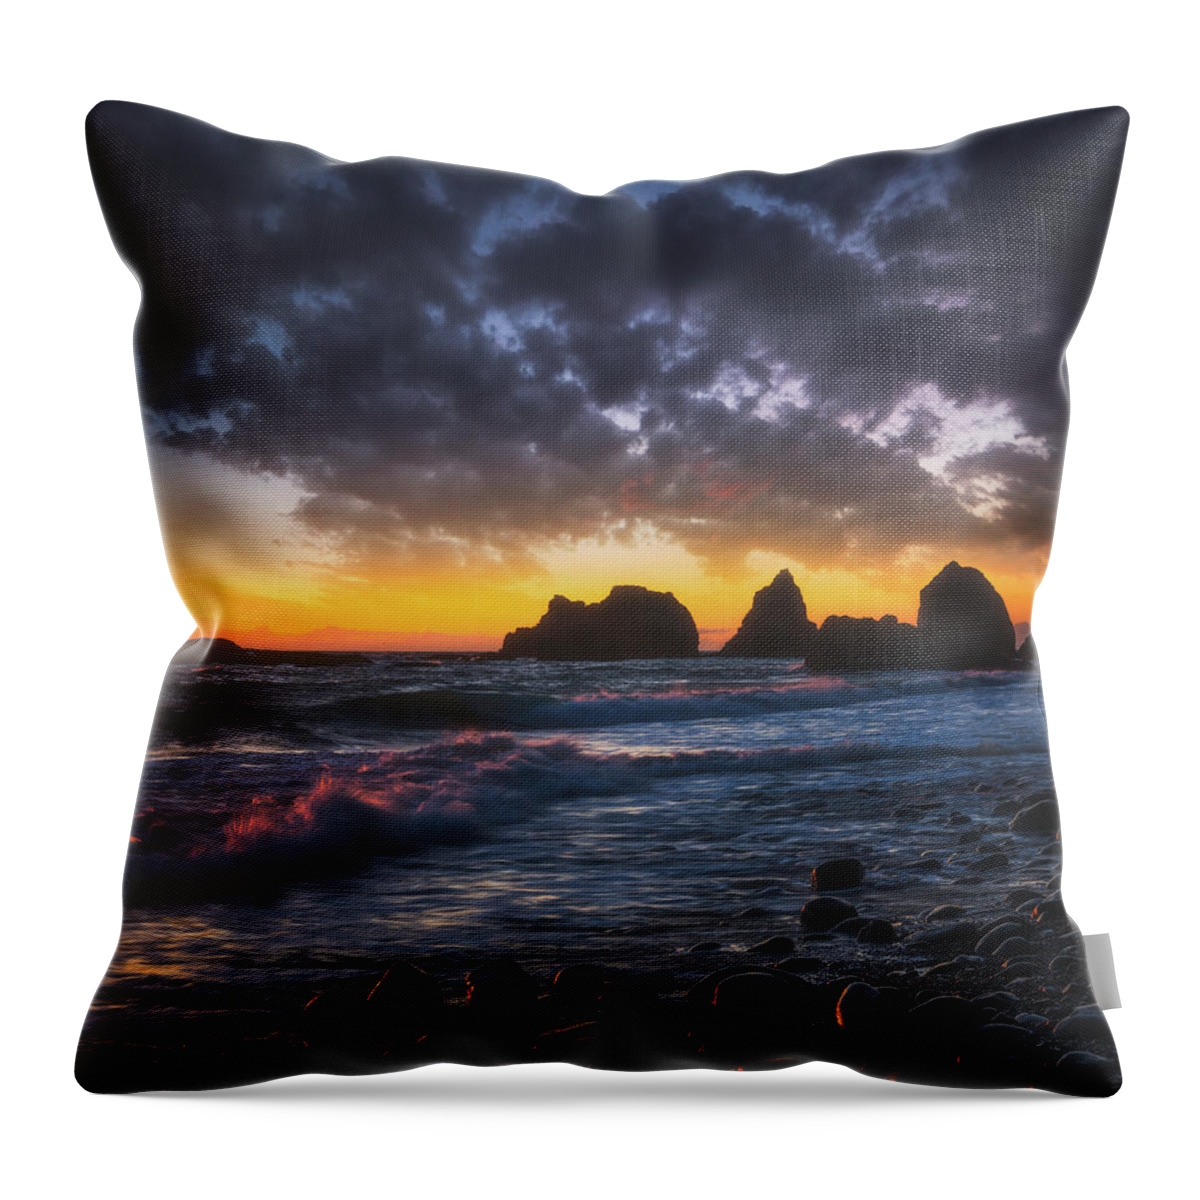  Throw Pillow featuring the photograph Oregon Souls by Darren White